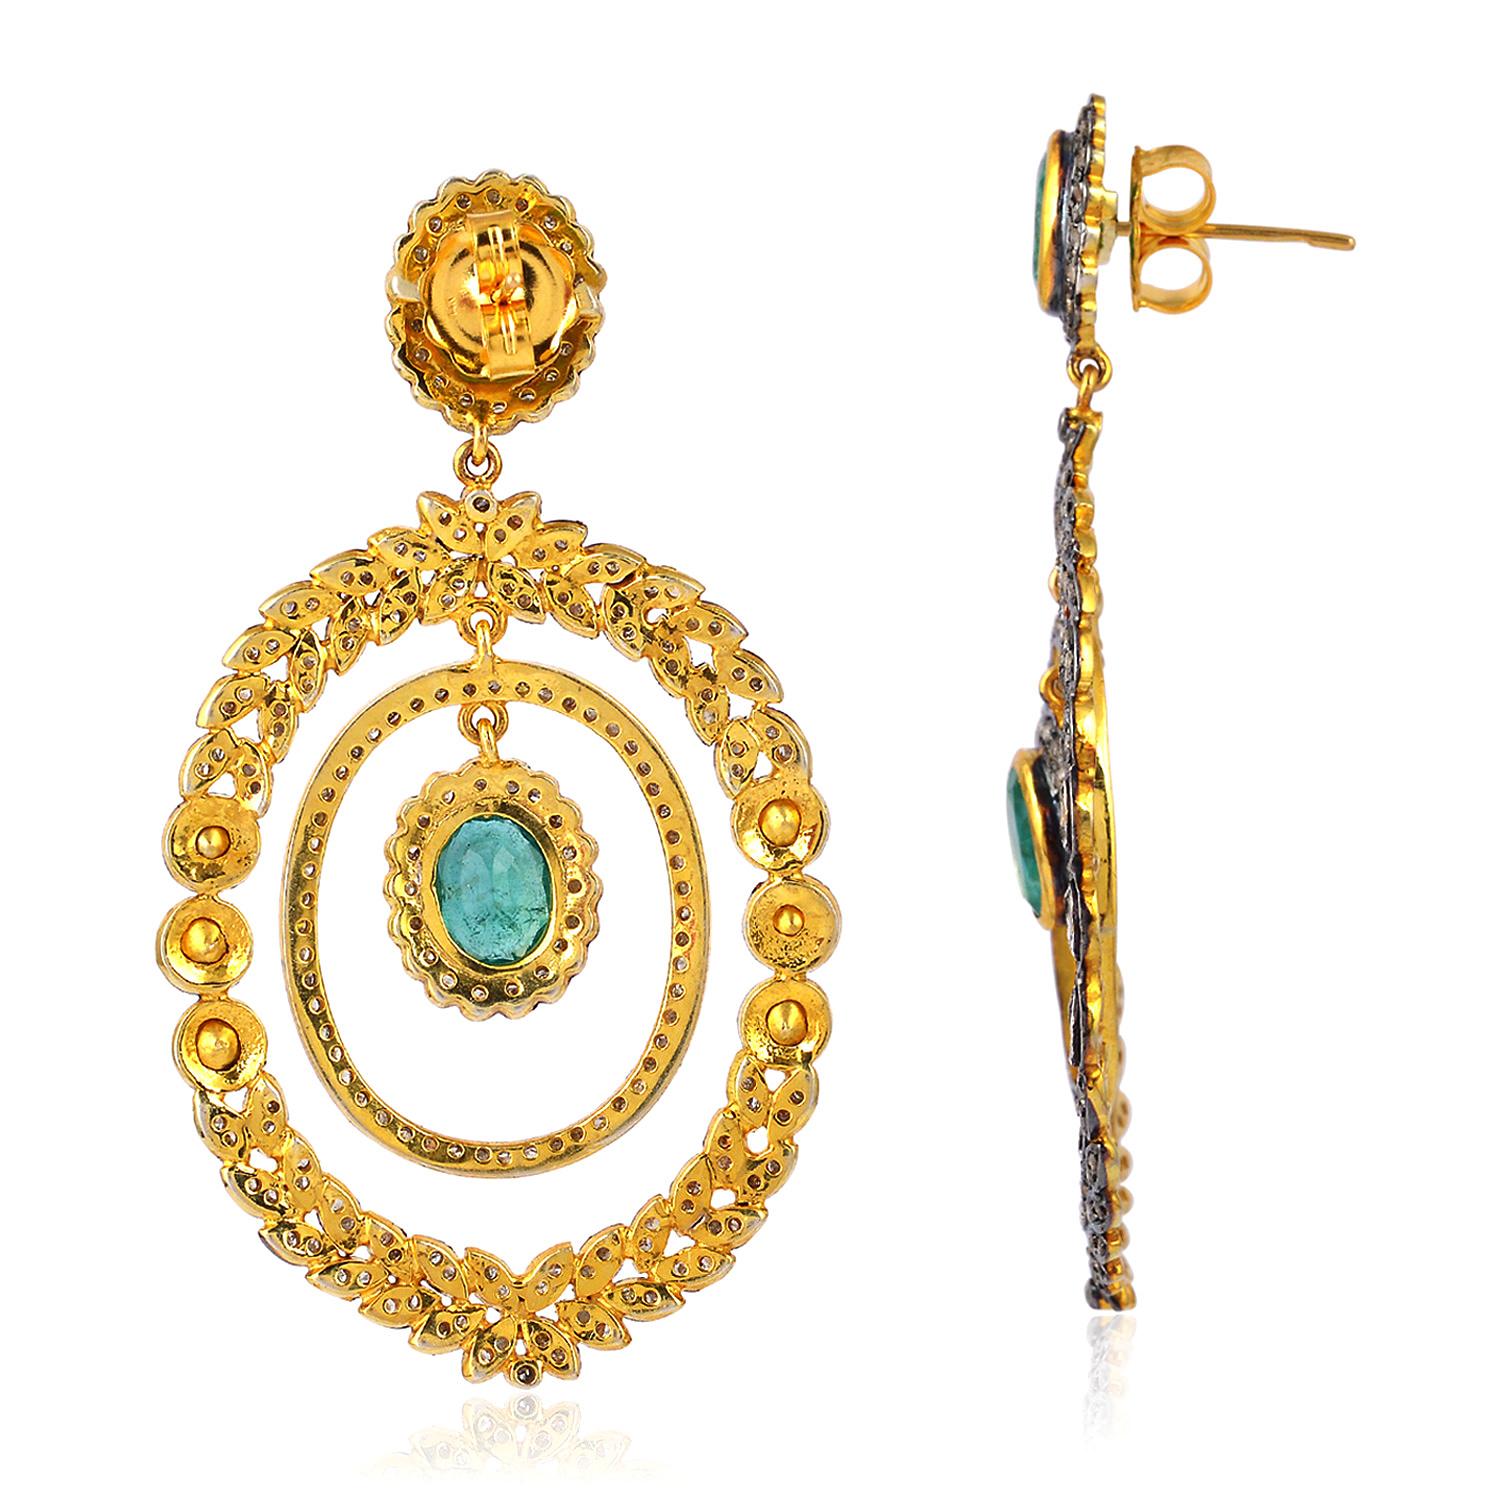 Inspired by the Mughal Era & Royal heritage these stunning earrings are handcrafted with 14-karat gold & sterling silver.  They have a chandelier-style silhouette that's encrusted with 6.11 carats emeralds and 4.04 carats rose cut diamonds with